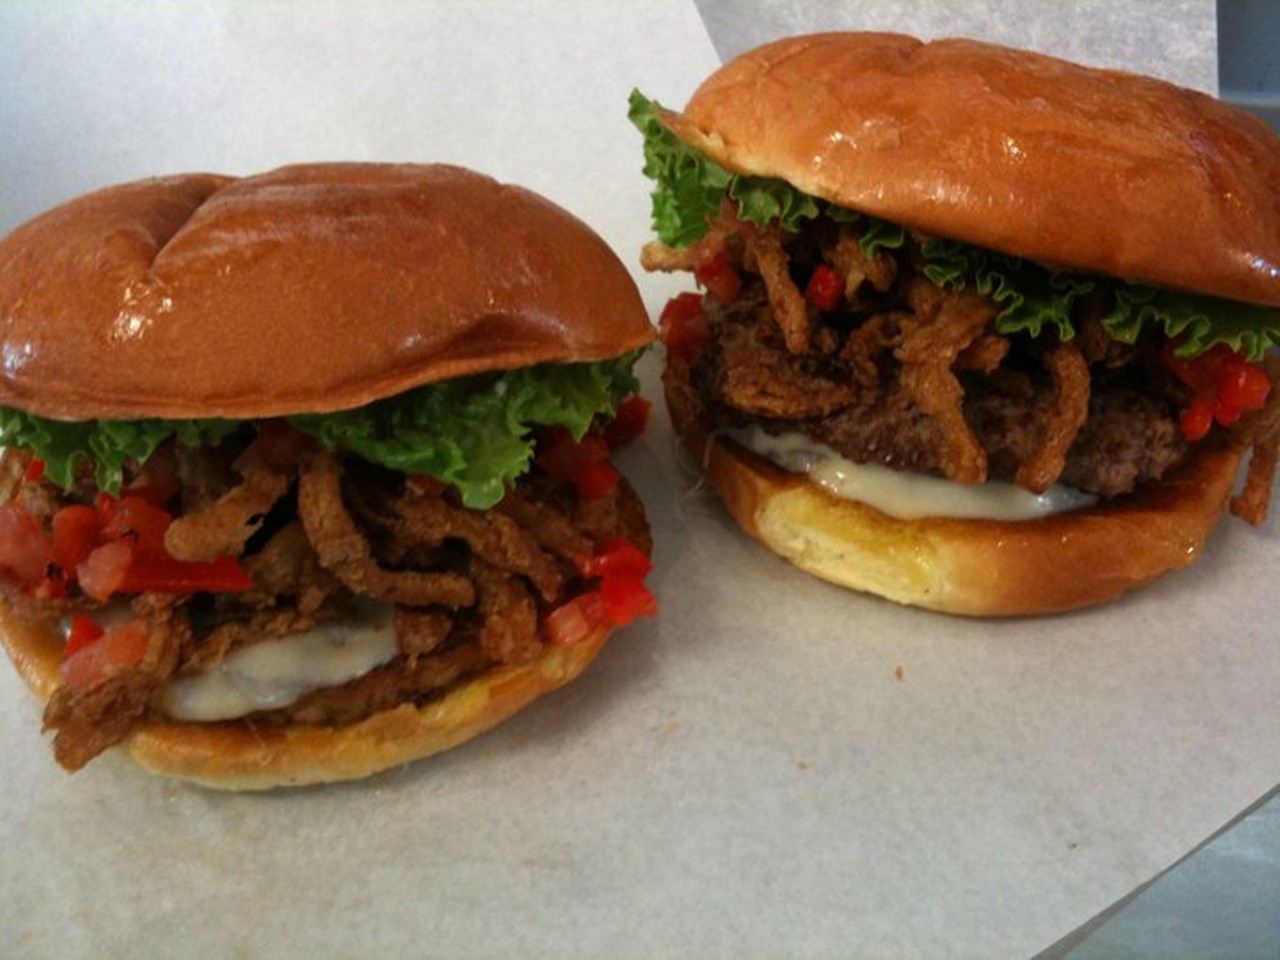 Brown Bag Burgers is located at 25853 Brookpark Rd, North Olmsted, OH 44070. Call (440)801-1122 for more information.